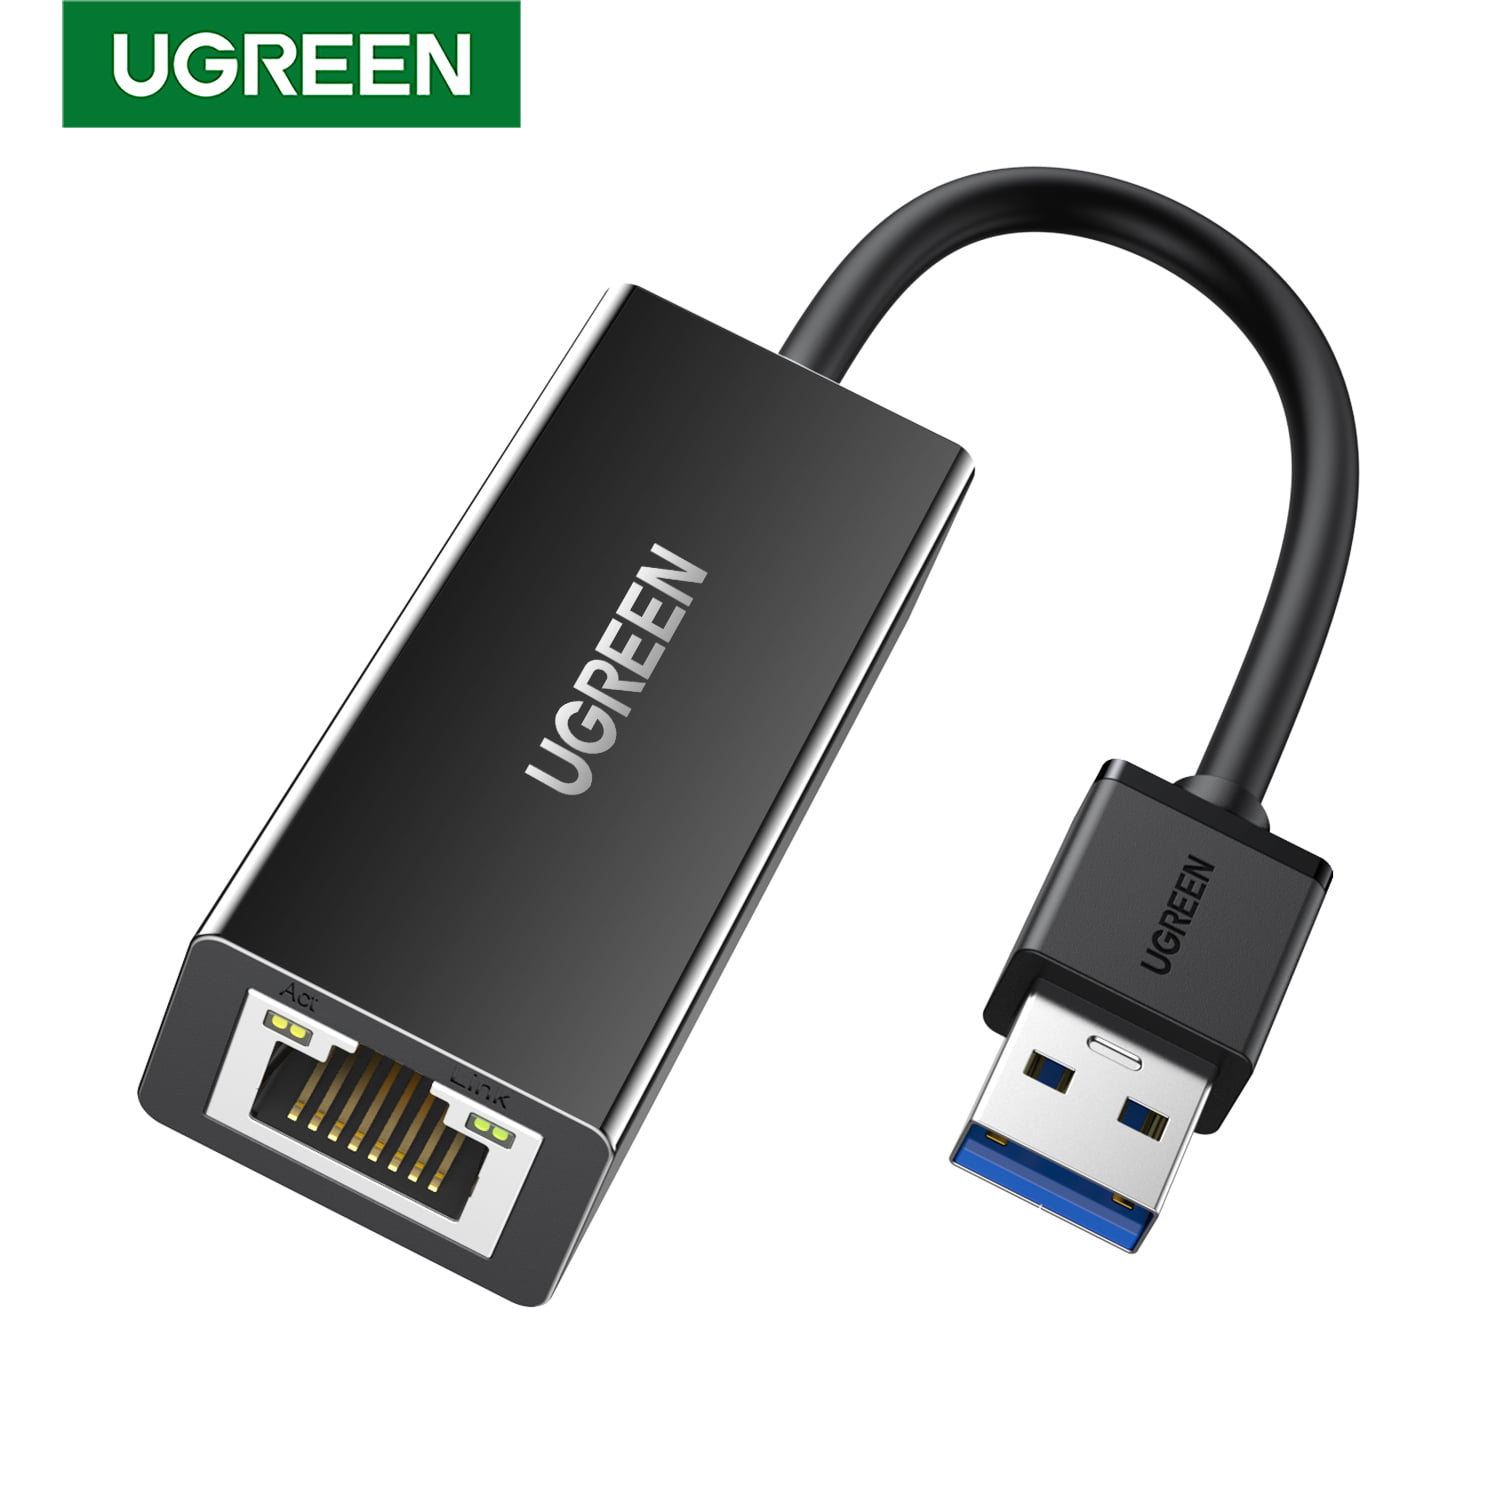 clone victory larynx UGREEN Ethernet Adapter USB 3.0 to 1000 Mbps RJ45 Wired Lan Adapter for  Windows Linux MacOS Laptop PC Gigabit Network Adapter Black - Walmart.com